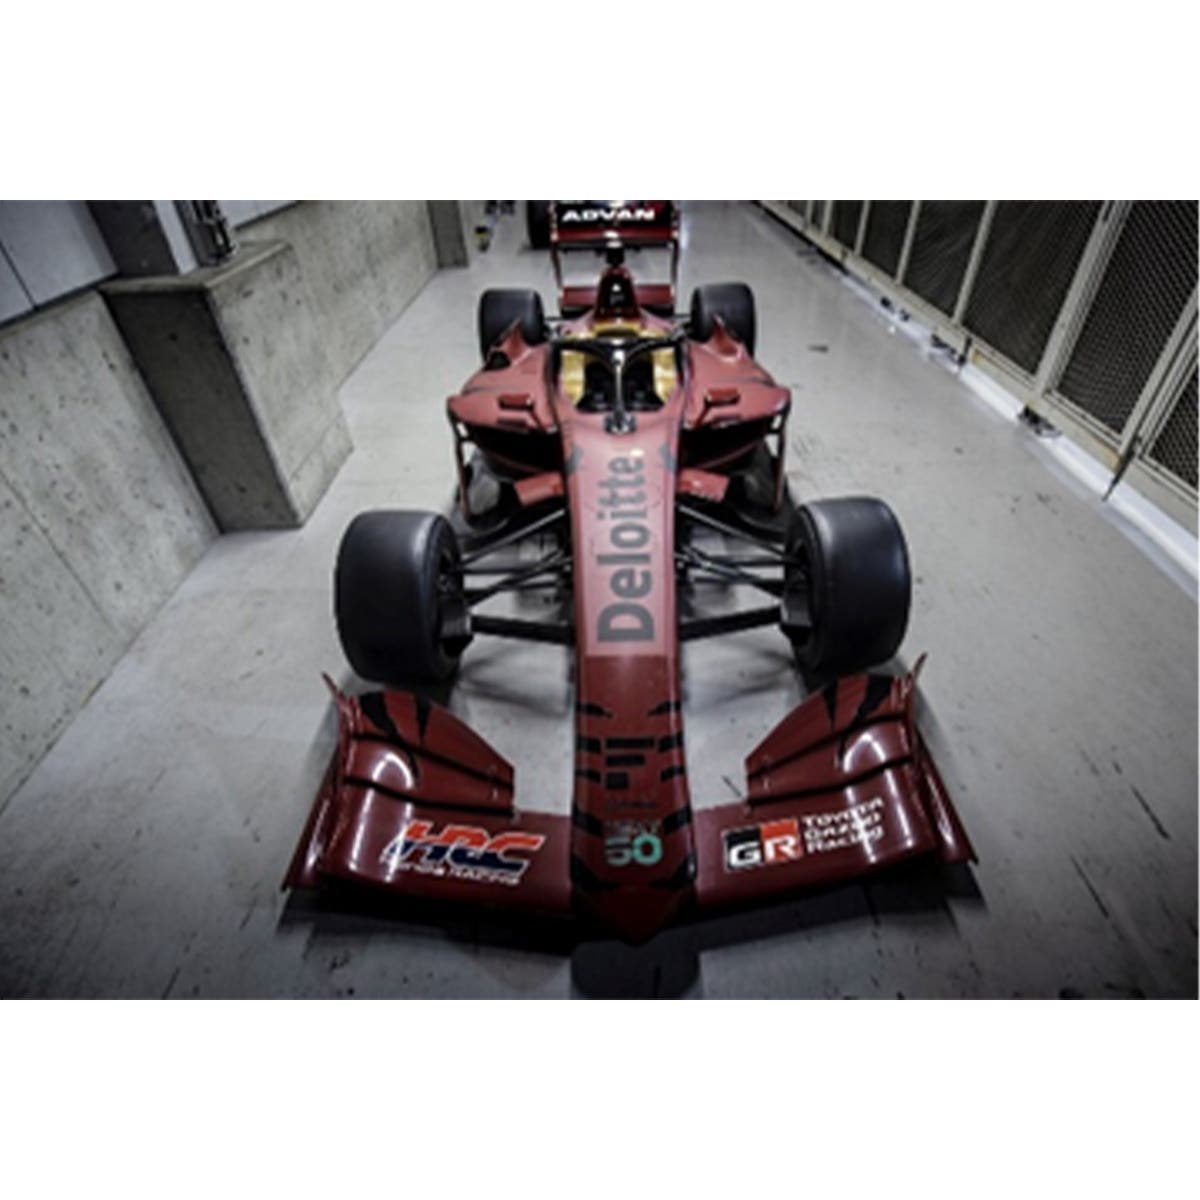 SF19 Next50 Test 2022 "Red Tiger" - Limited 500 - 1:43 Scale Resin Model Car